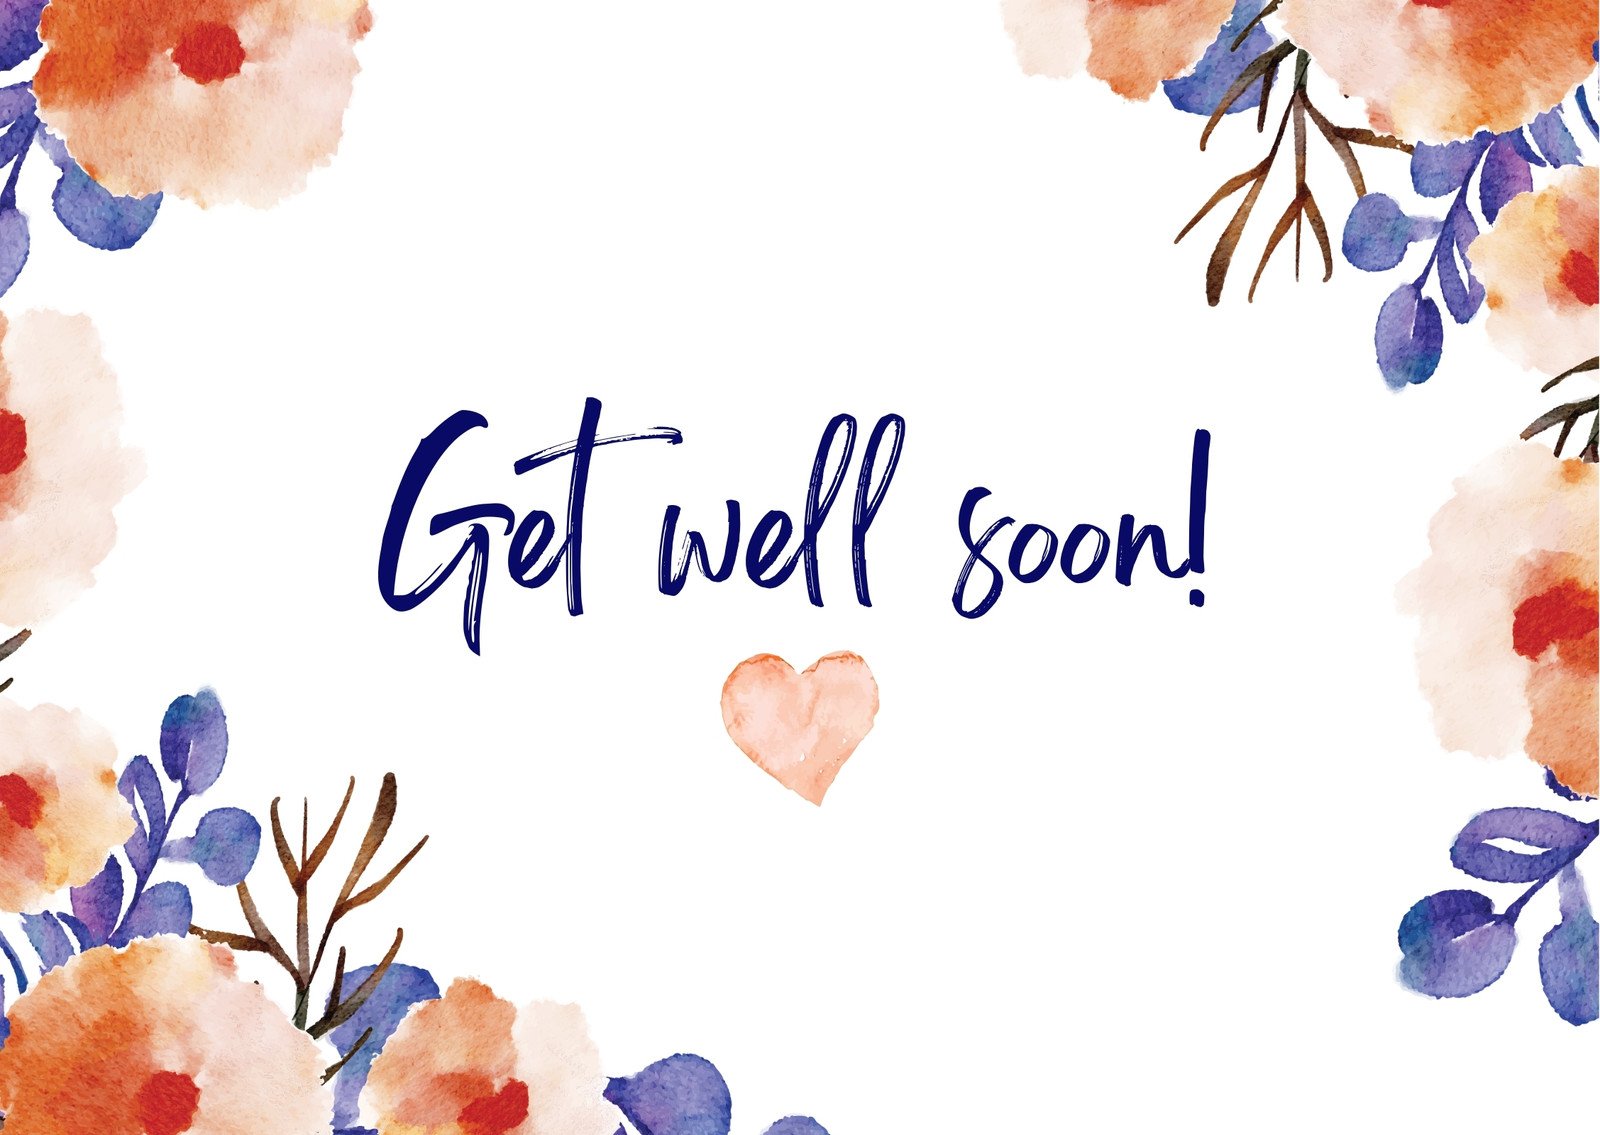 Free Get Well Soon Card With Bear Illustration template